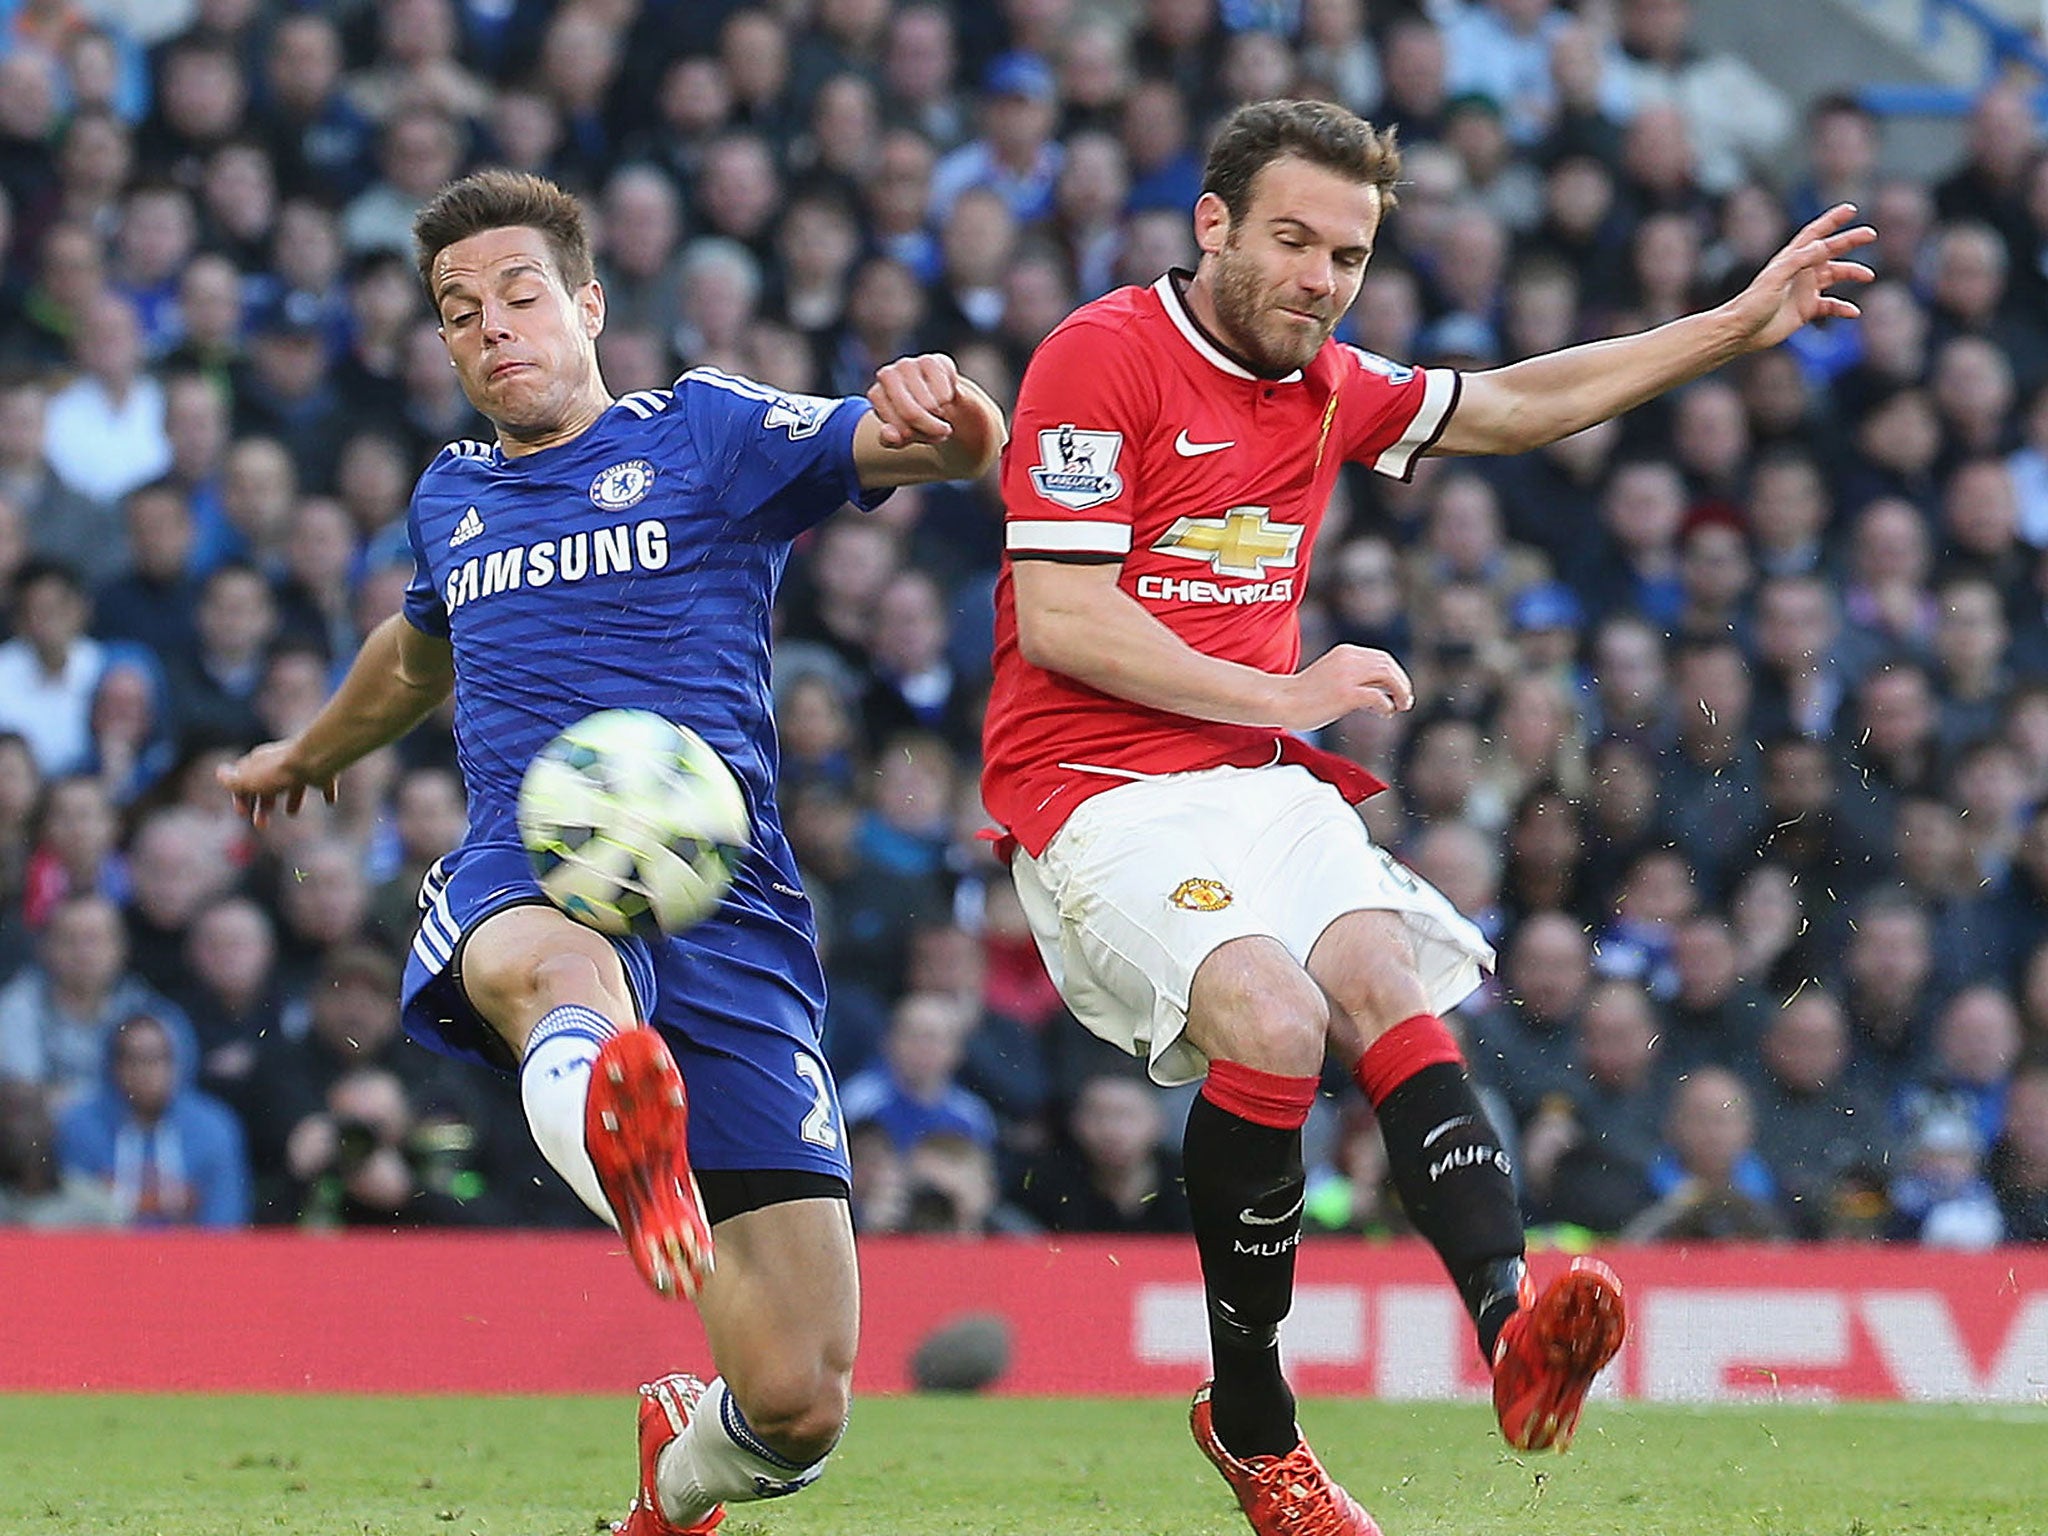 Juan Mata in action for Manchester United against Chelsea on Saturday